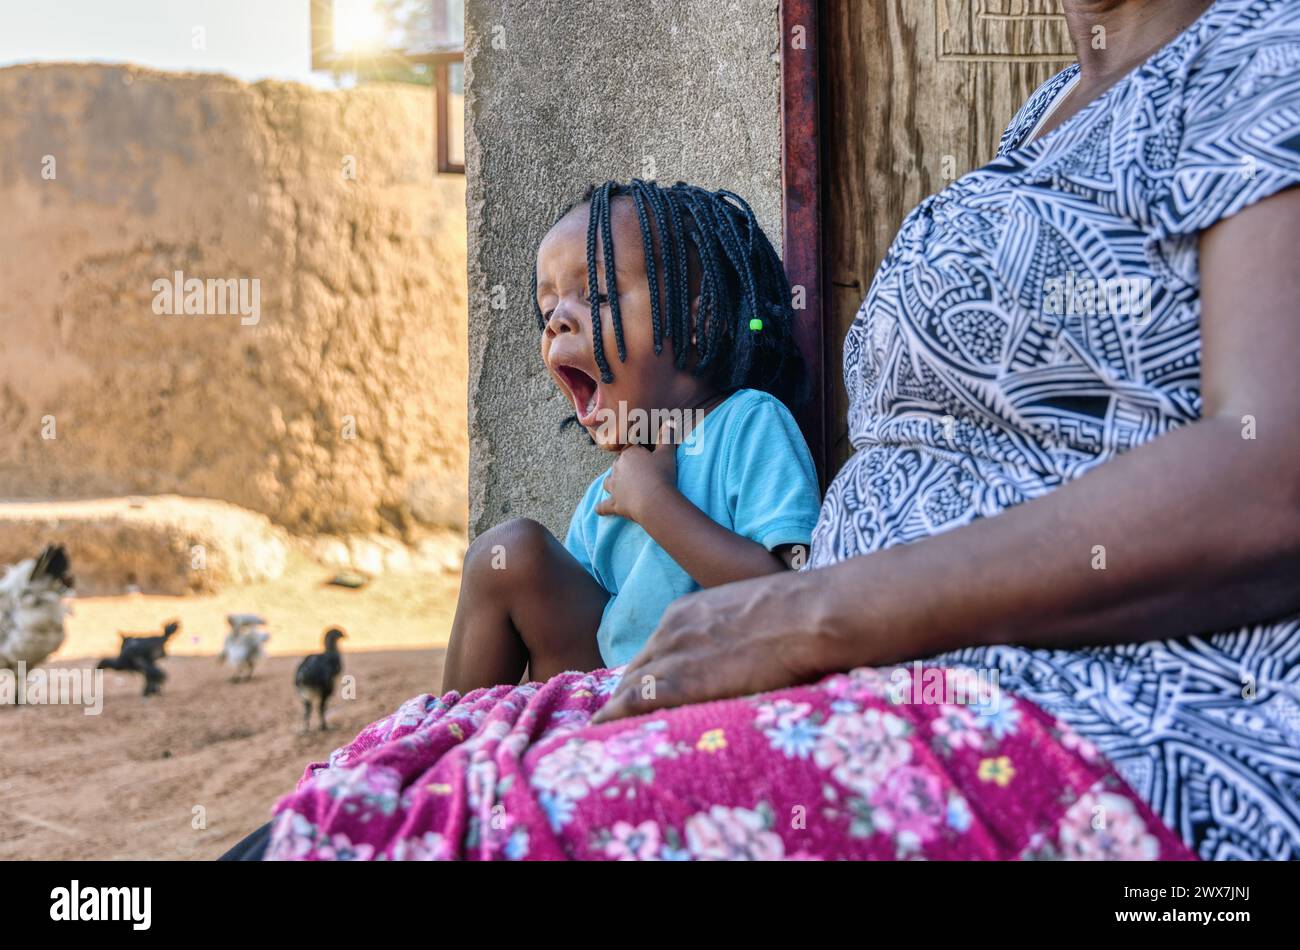 sleepy tired african child with braids sitting together with her granny on the veranda, chickens running, , african village life Stock Photo